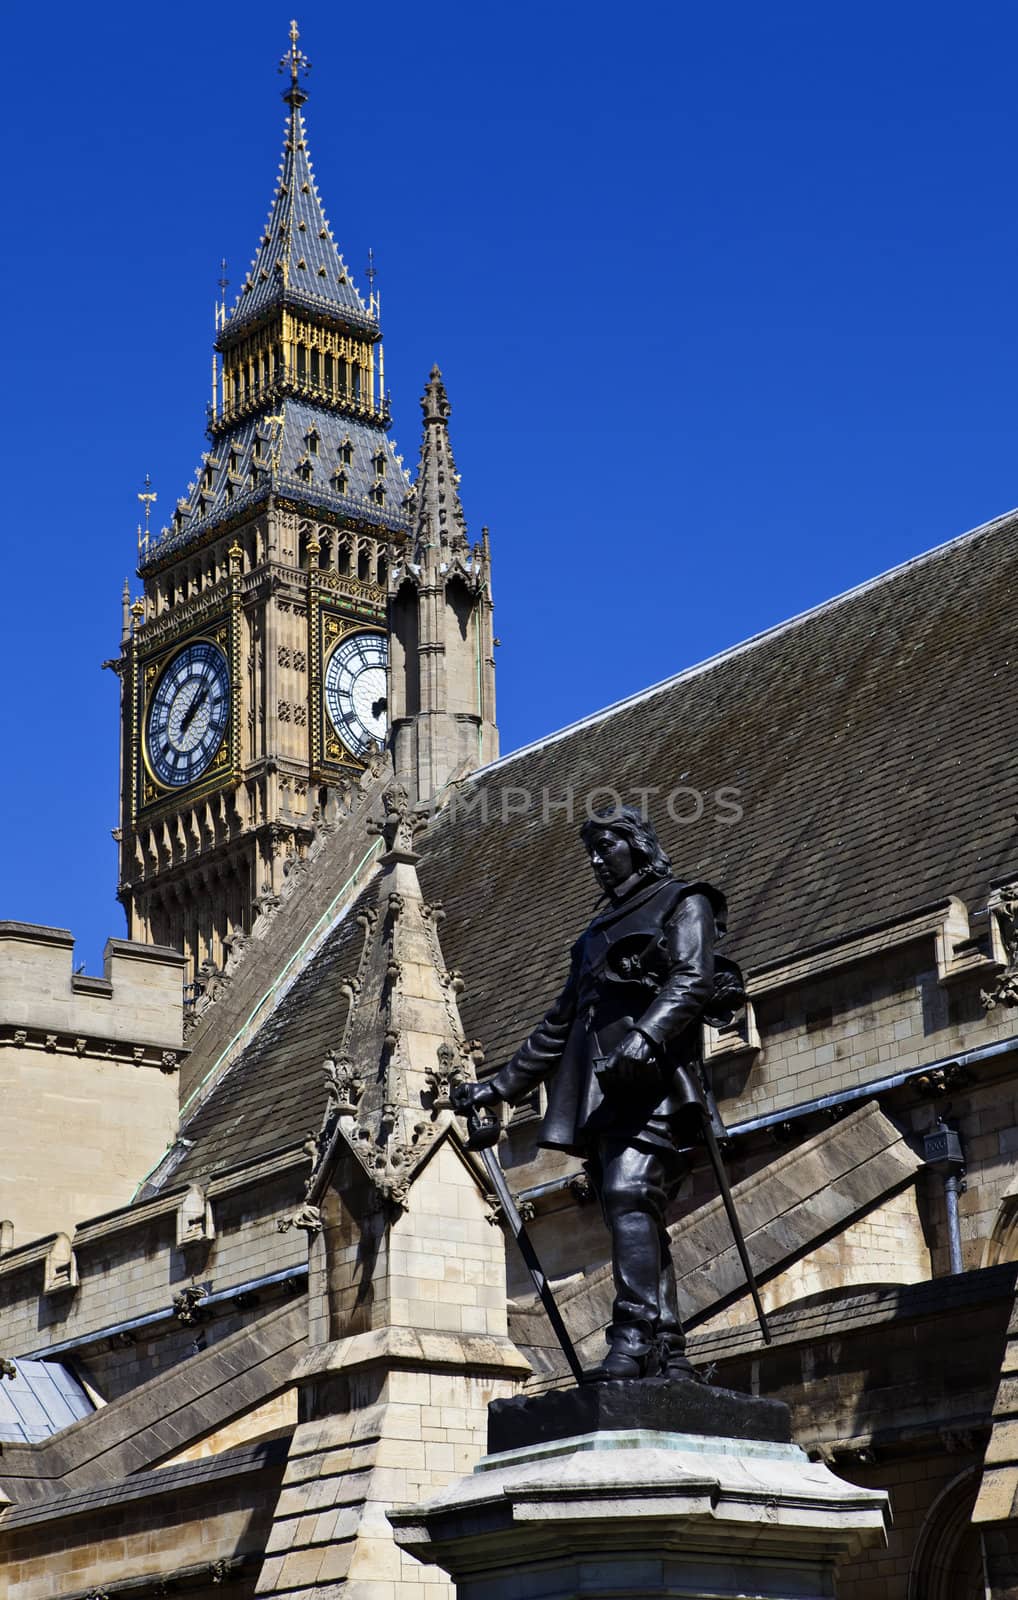 Statue of Oliver Cromwell situated outside the Houses of Parliament in London.